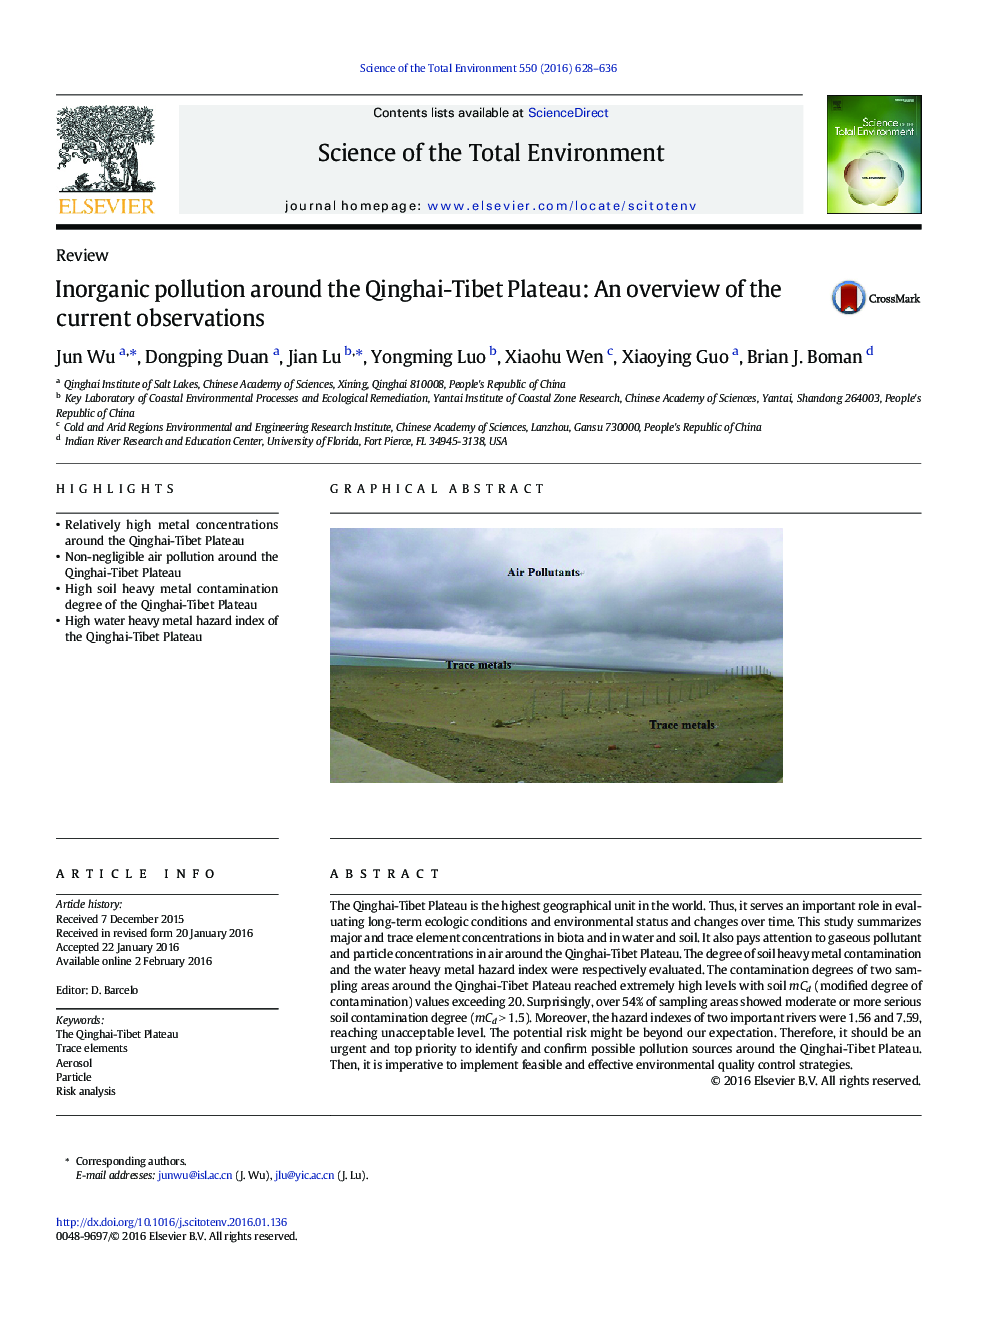 ReviewInorganic pollution around the Qinghai-Tibet Plateau: An overview of the current observations